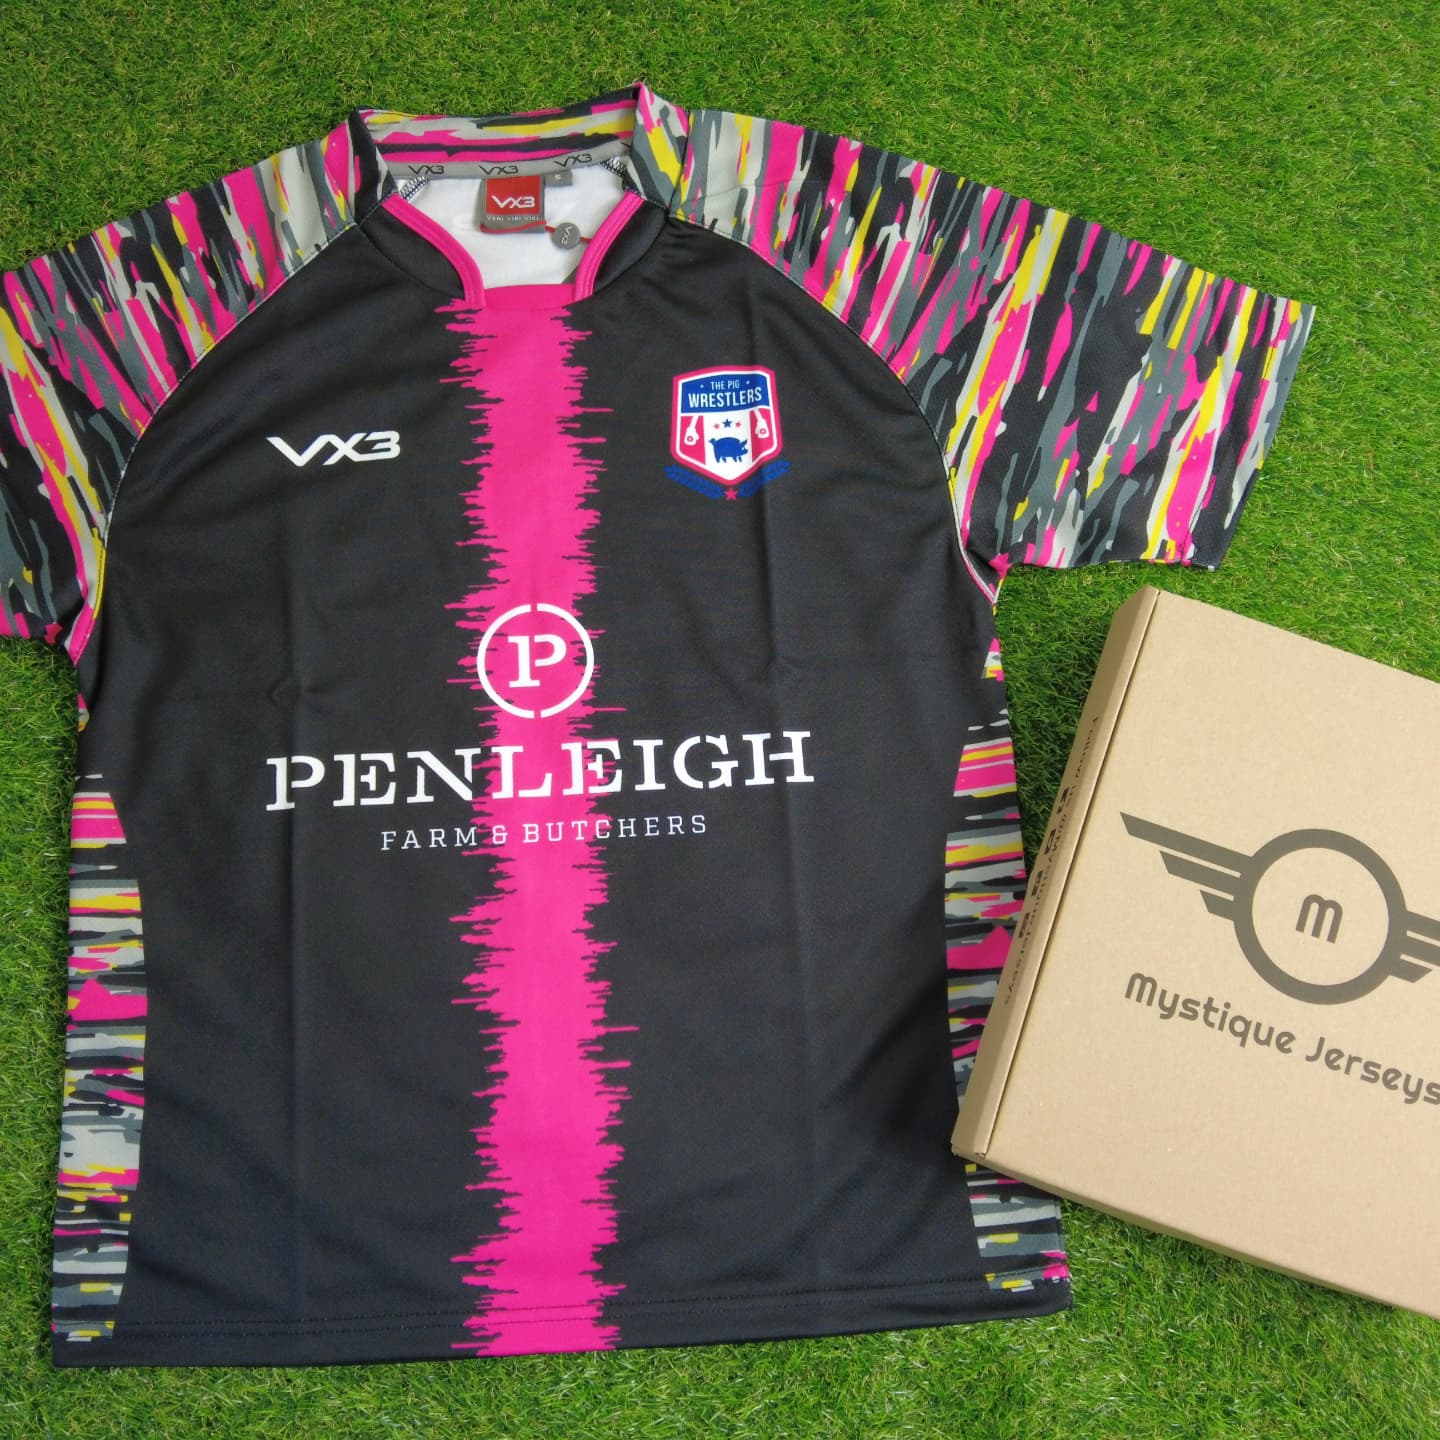 Dive into the unknown with our Mystery Rugby Shirt Box! Experience the thrill of unboxing a surprise rugby shirt, meticulously curated to delight rugby enthusiasts of all levels. A must-have for anyone passionate about the sport.